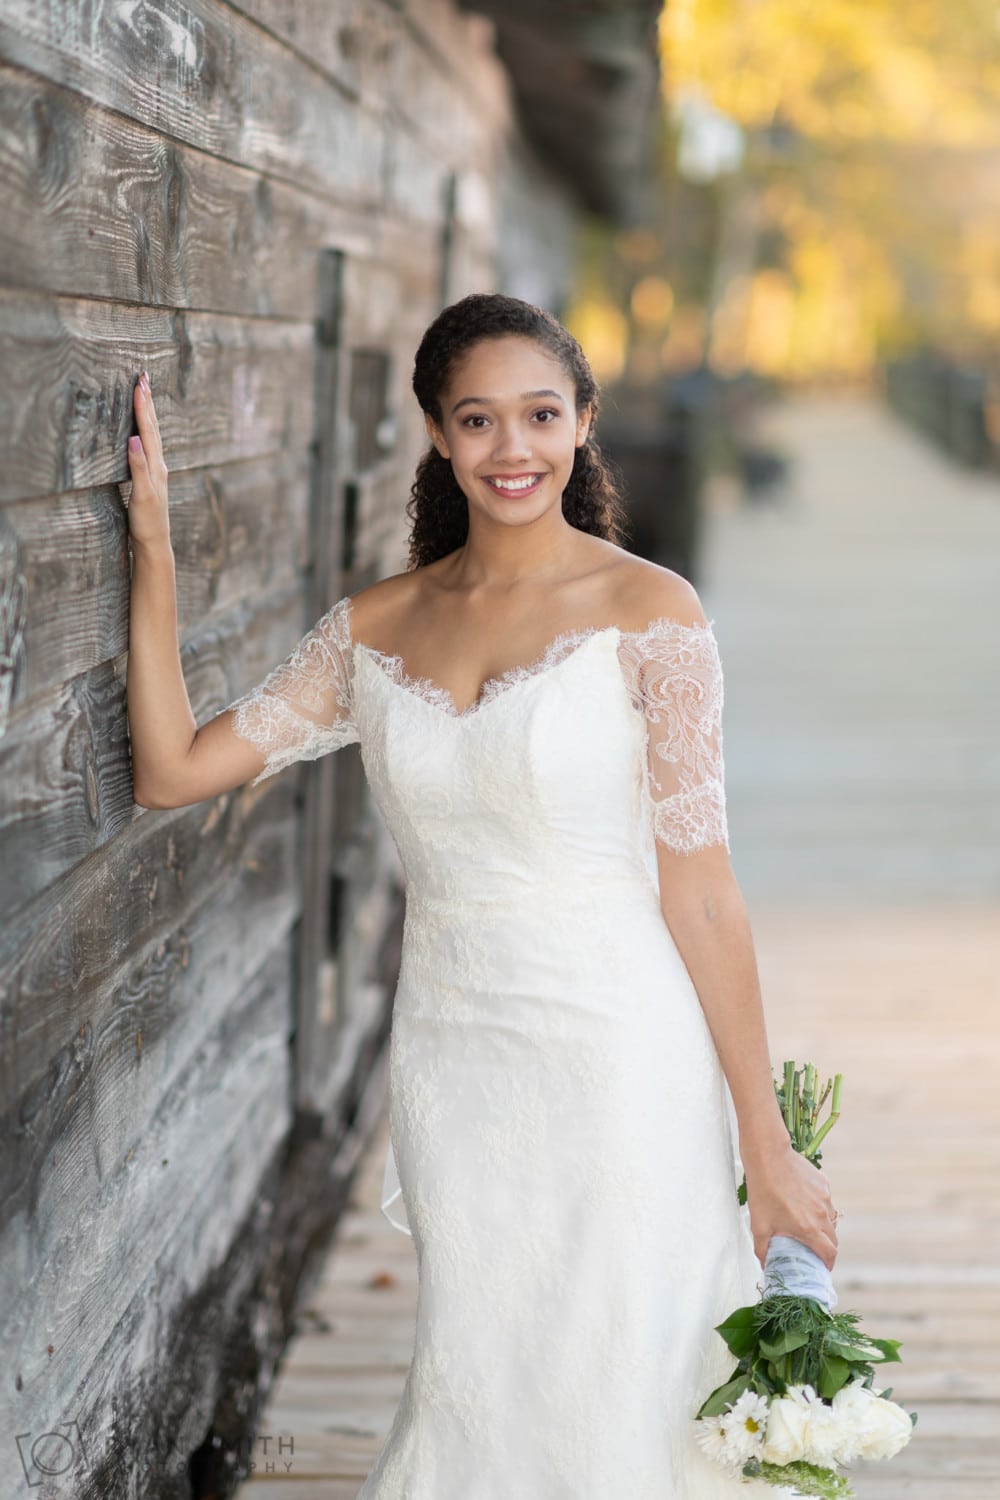 Bridal portraits leaning on the old wood of the rustic building - Conway Riverwalk